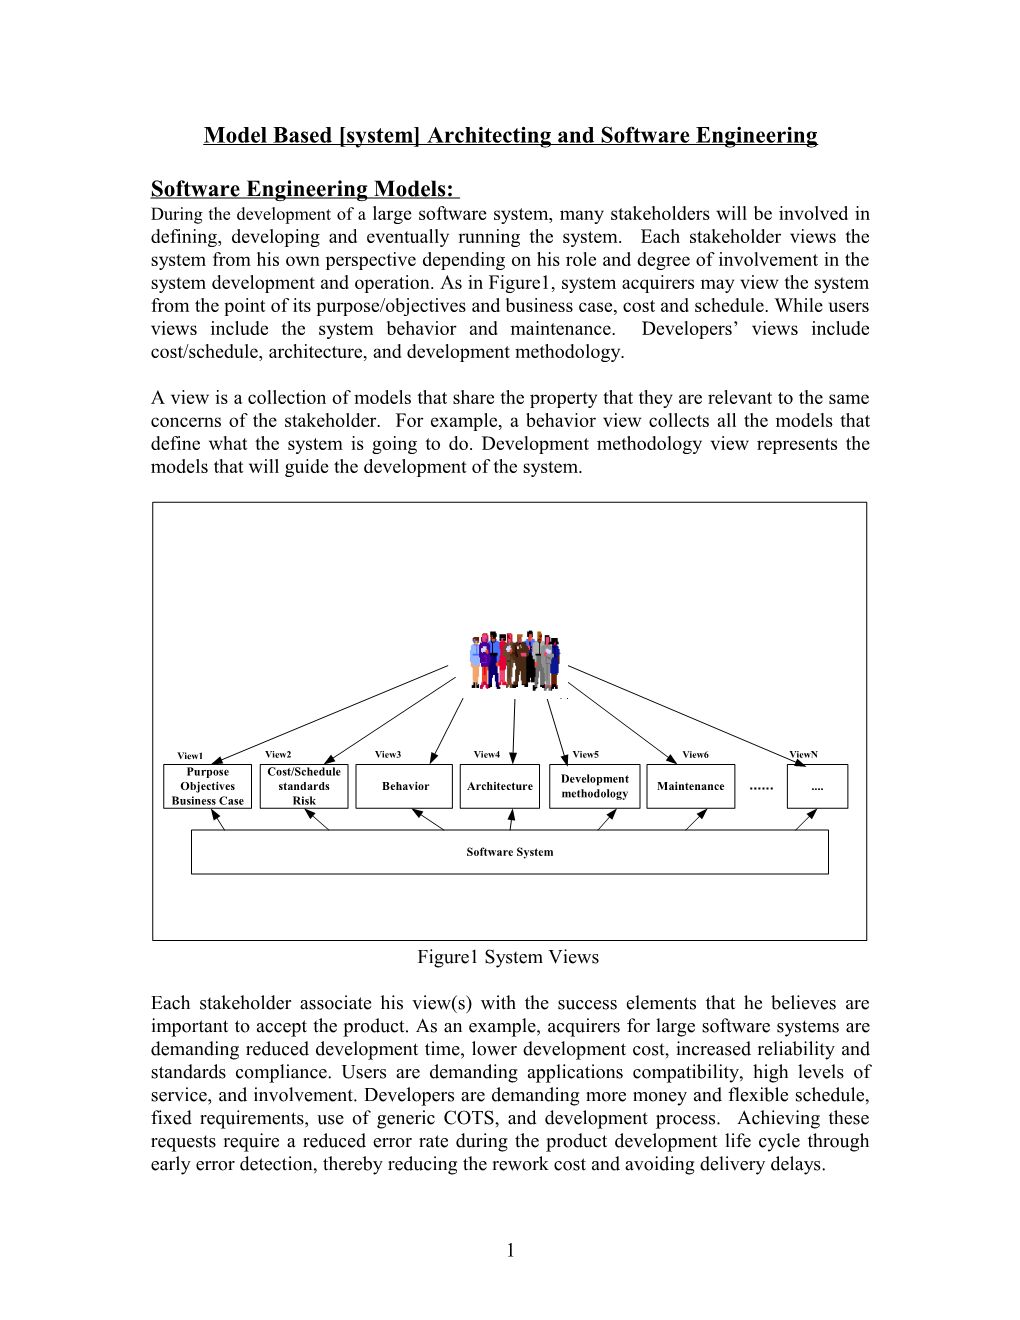 Model Based System Architecting and Software Engineering